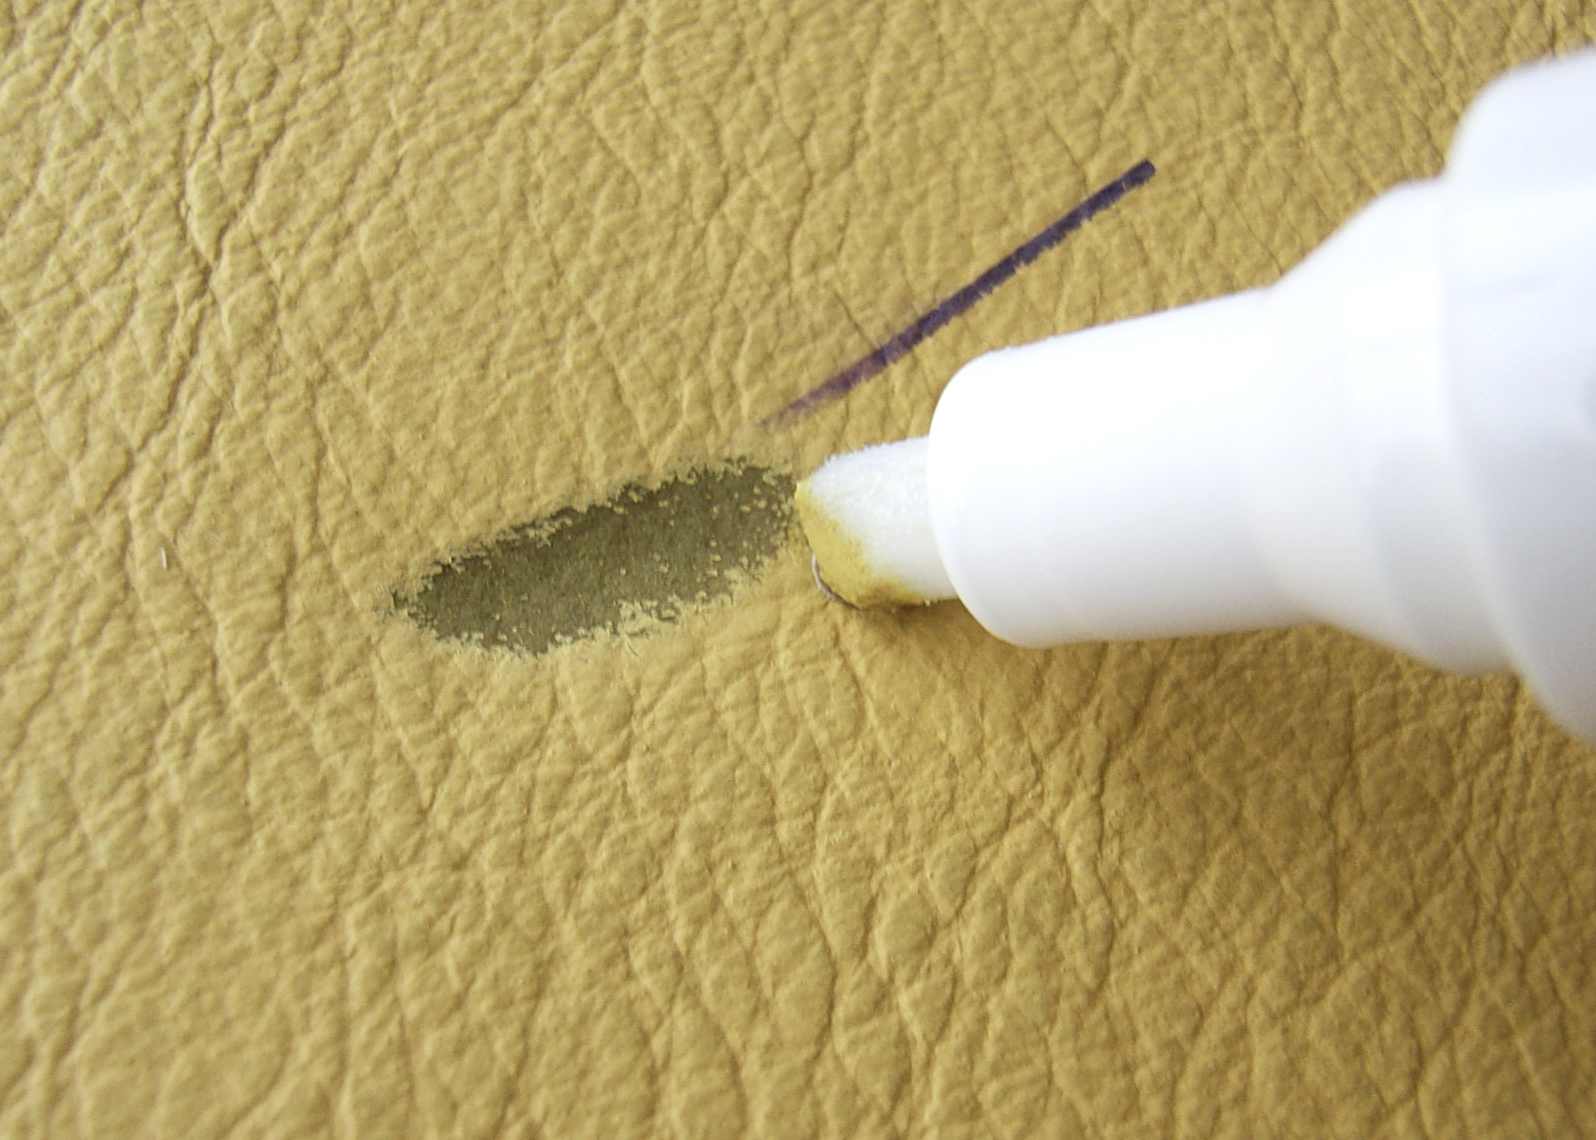 Biro Ballpoint Pen Marks From Leather, How To Remove Pen Ink From Leather Sofa